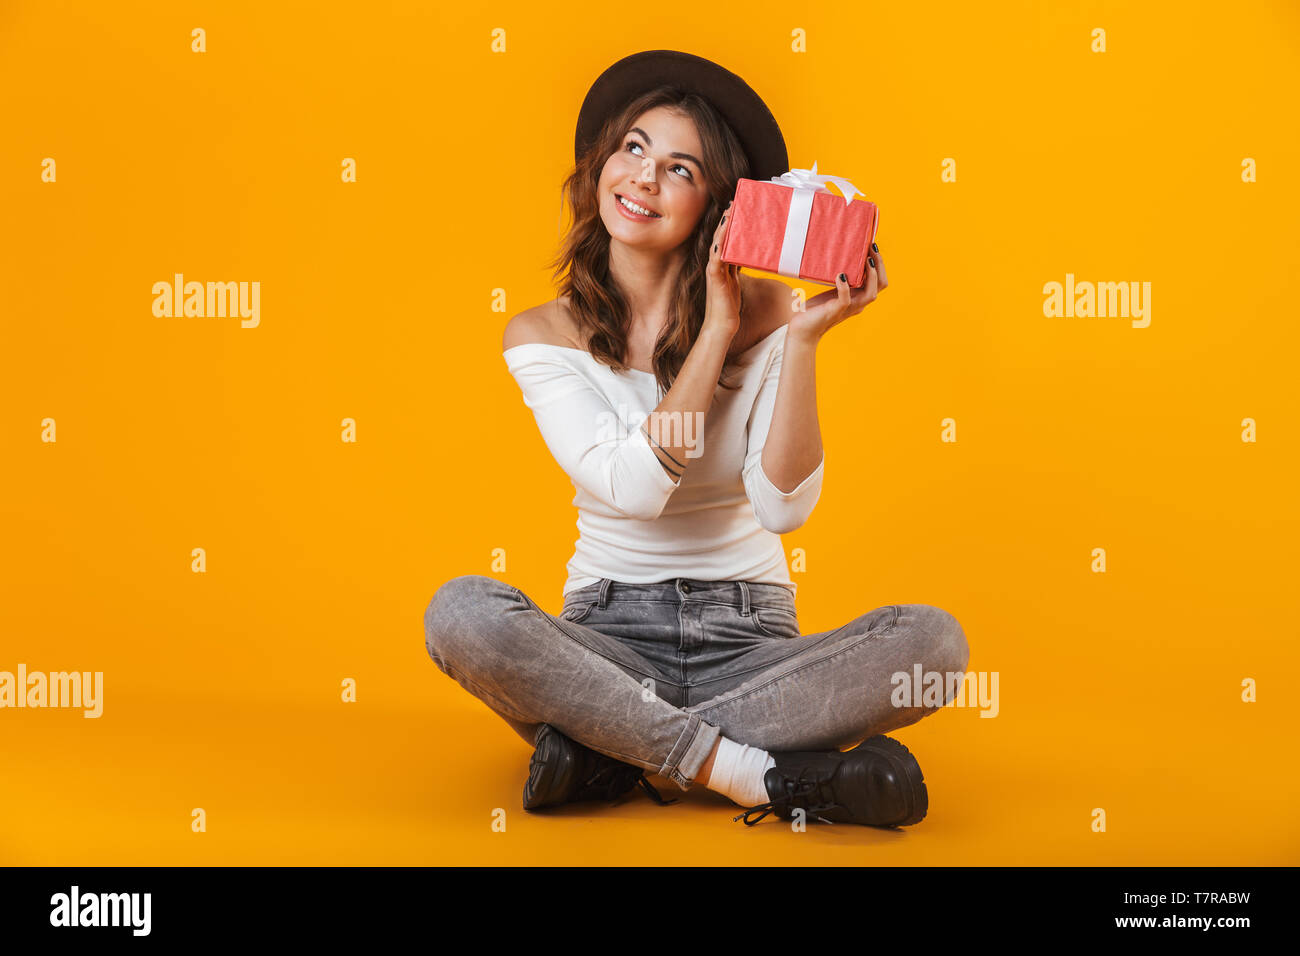 Portrait of a cheerful young woman wearing white shirt and hat sitting isolated over yellow background, holding gift box Stock Photo